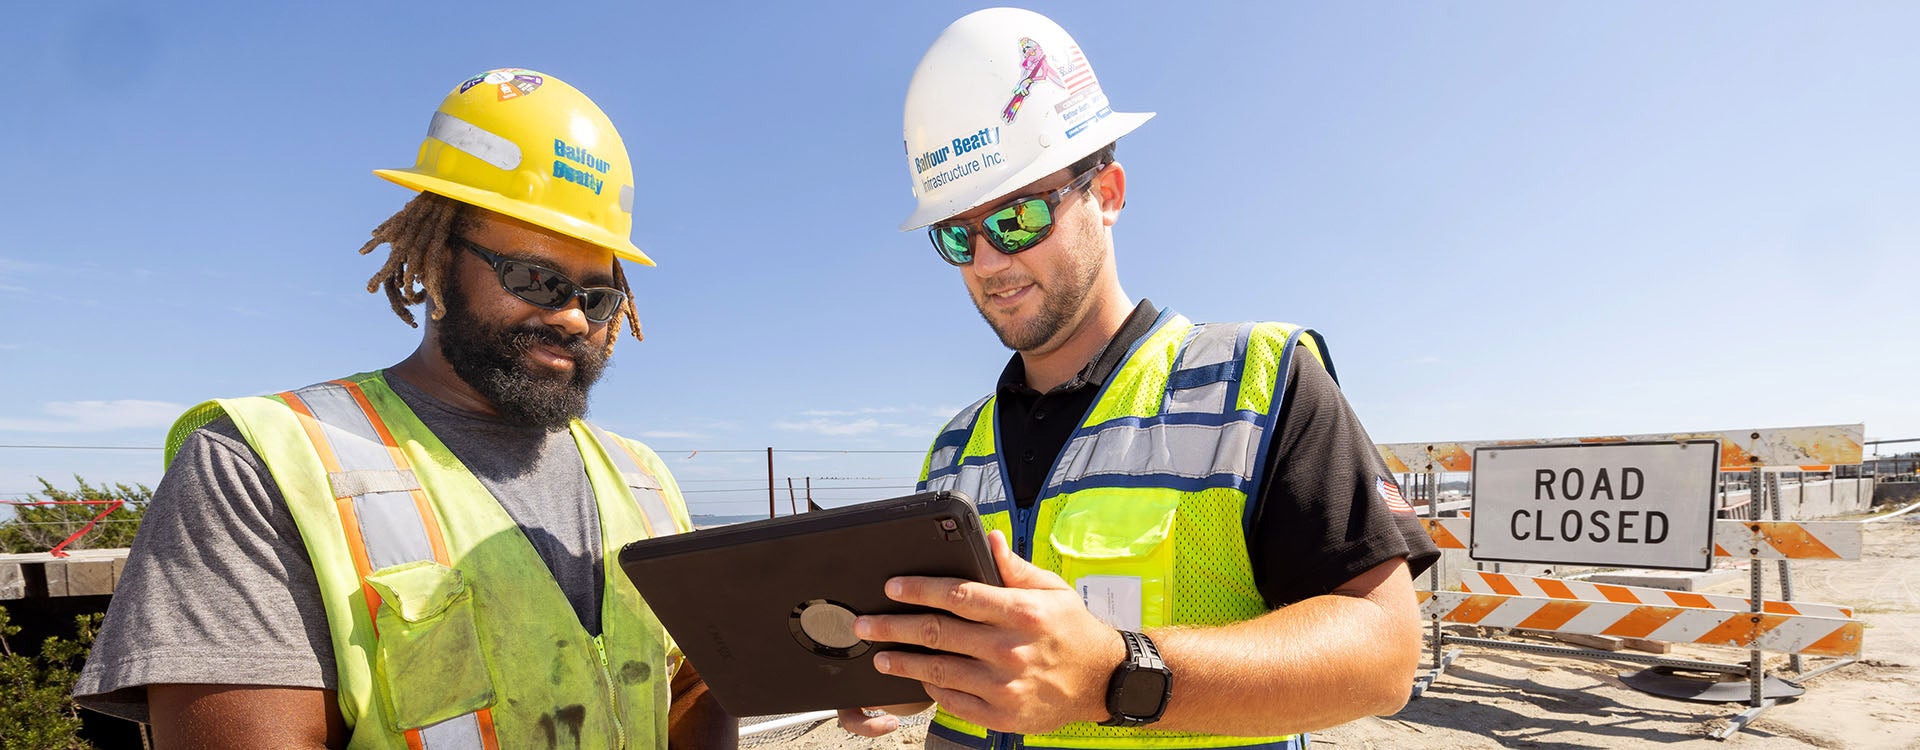 Will Janning, right, discusses work with Andrew Wright at the Harkers Island bridge replacement project. Janning has been part of the project since it started in 2021, helping write and execute contracts and working as a member of the on-site management team. (Photo by Rhett Butler)